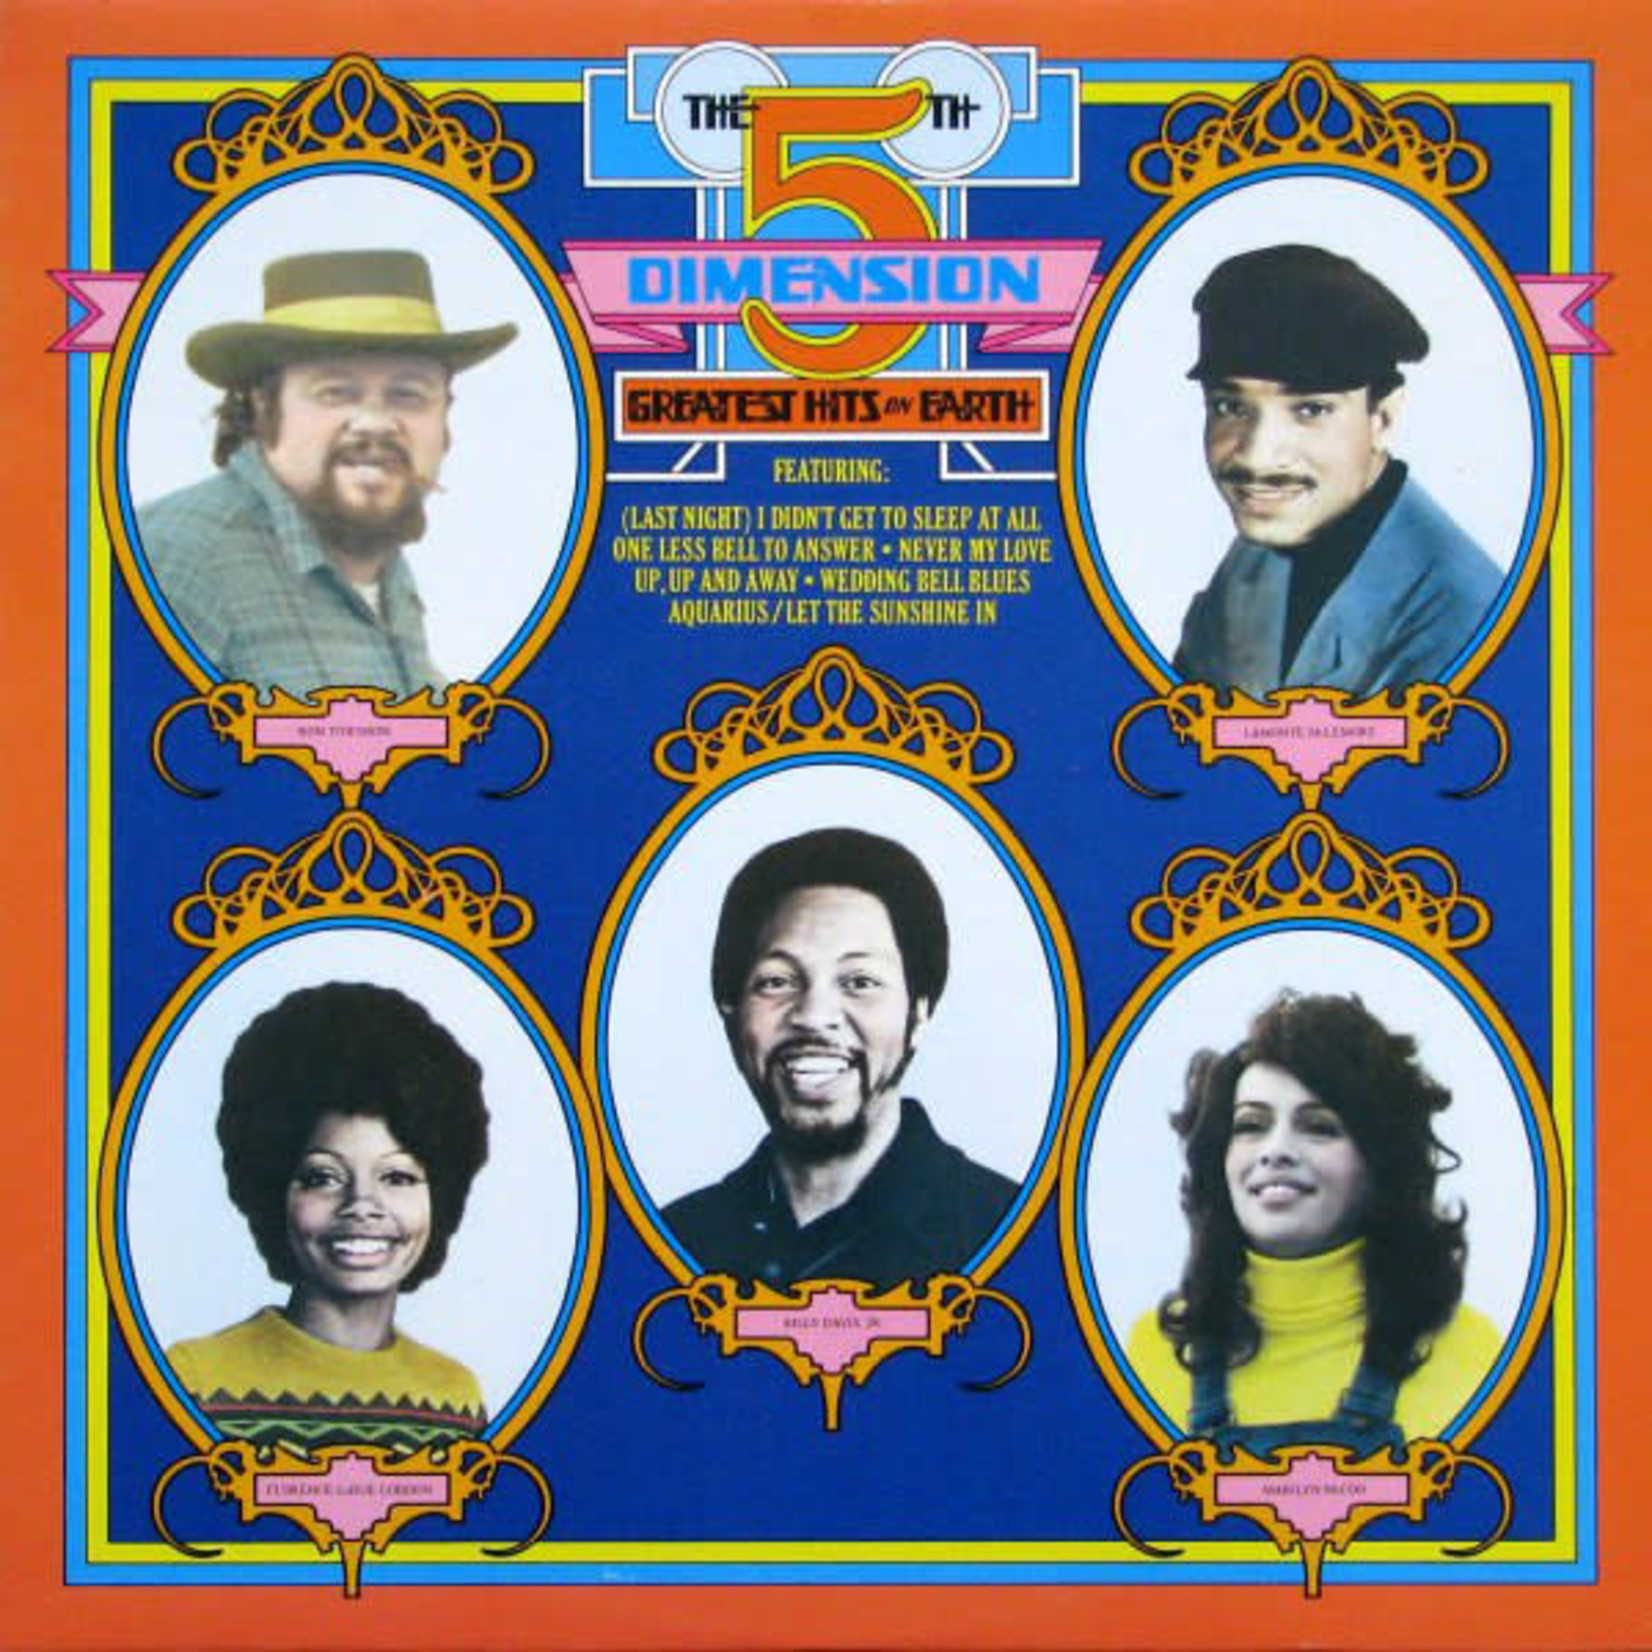 [Vintage] 5th Dimension - Greatest Hits on Earth